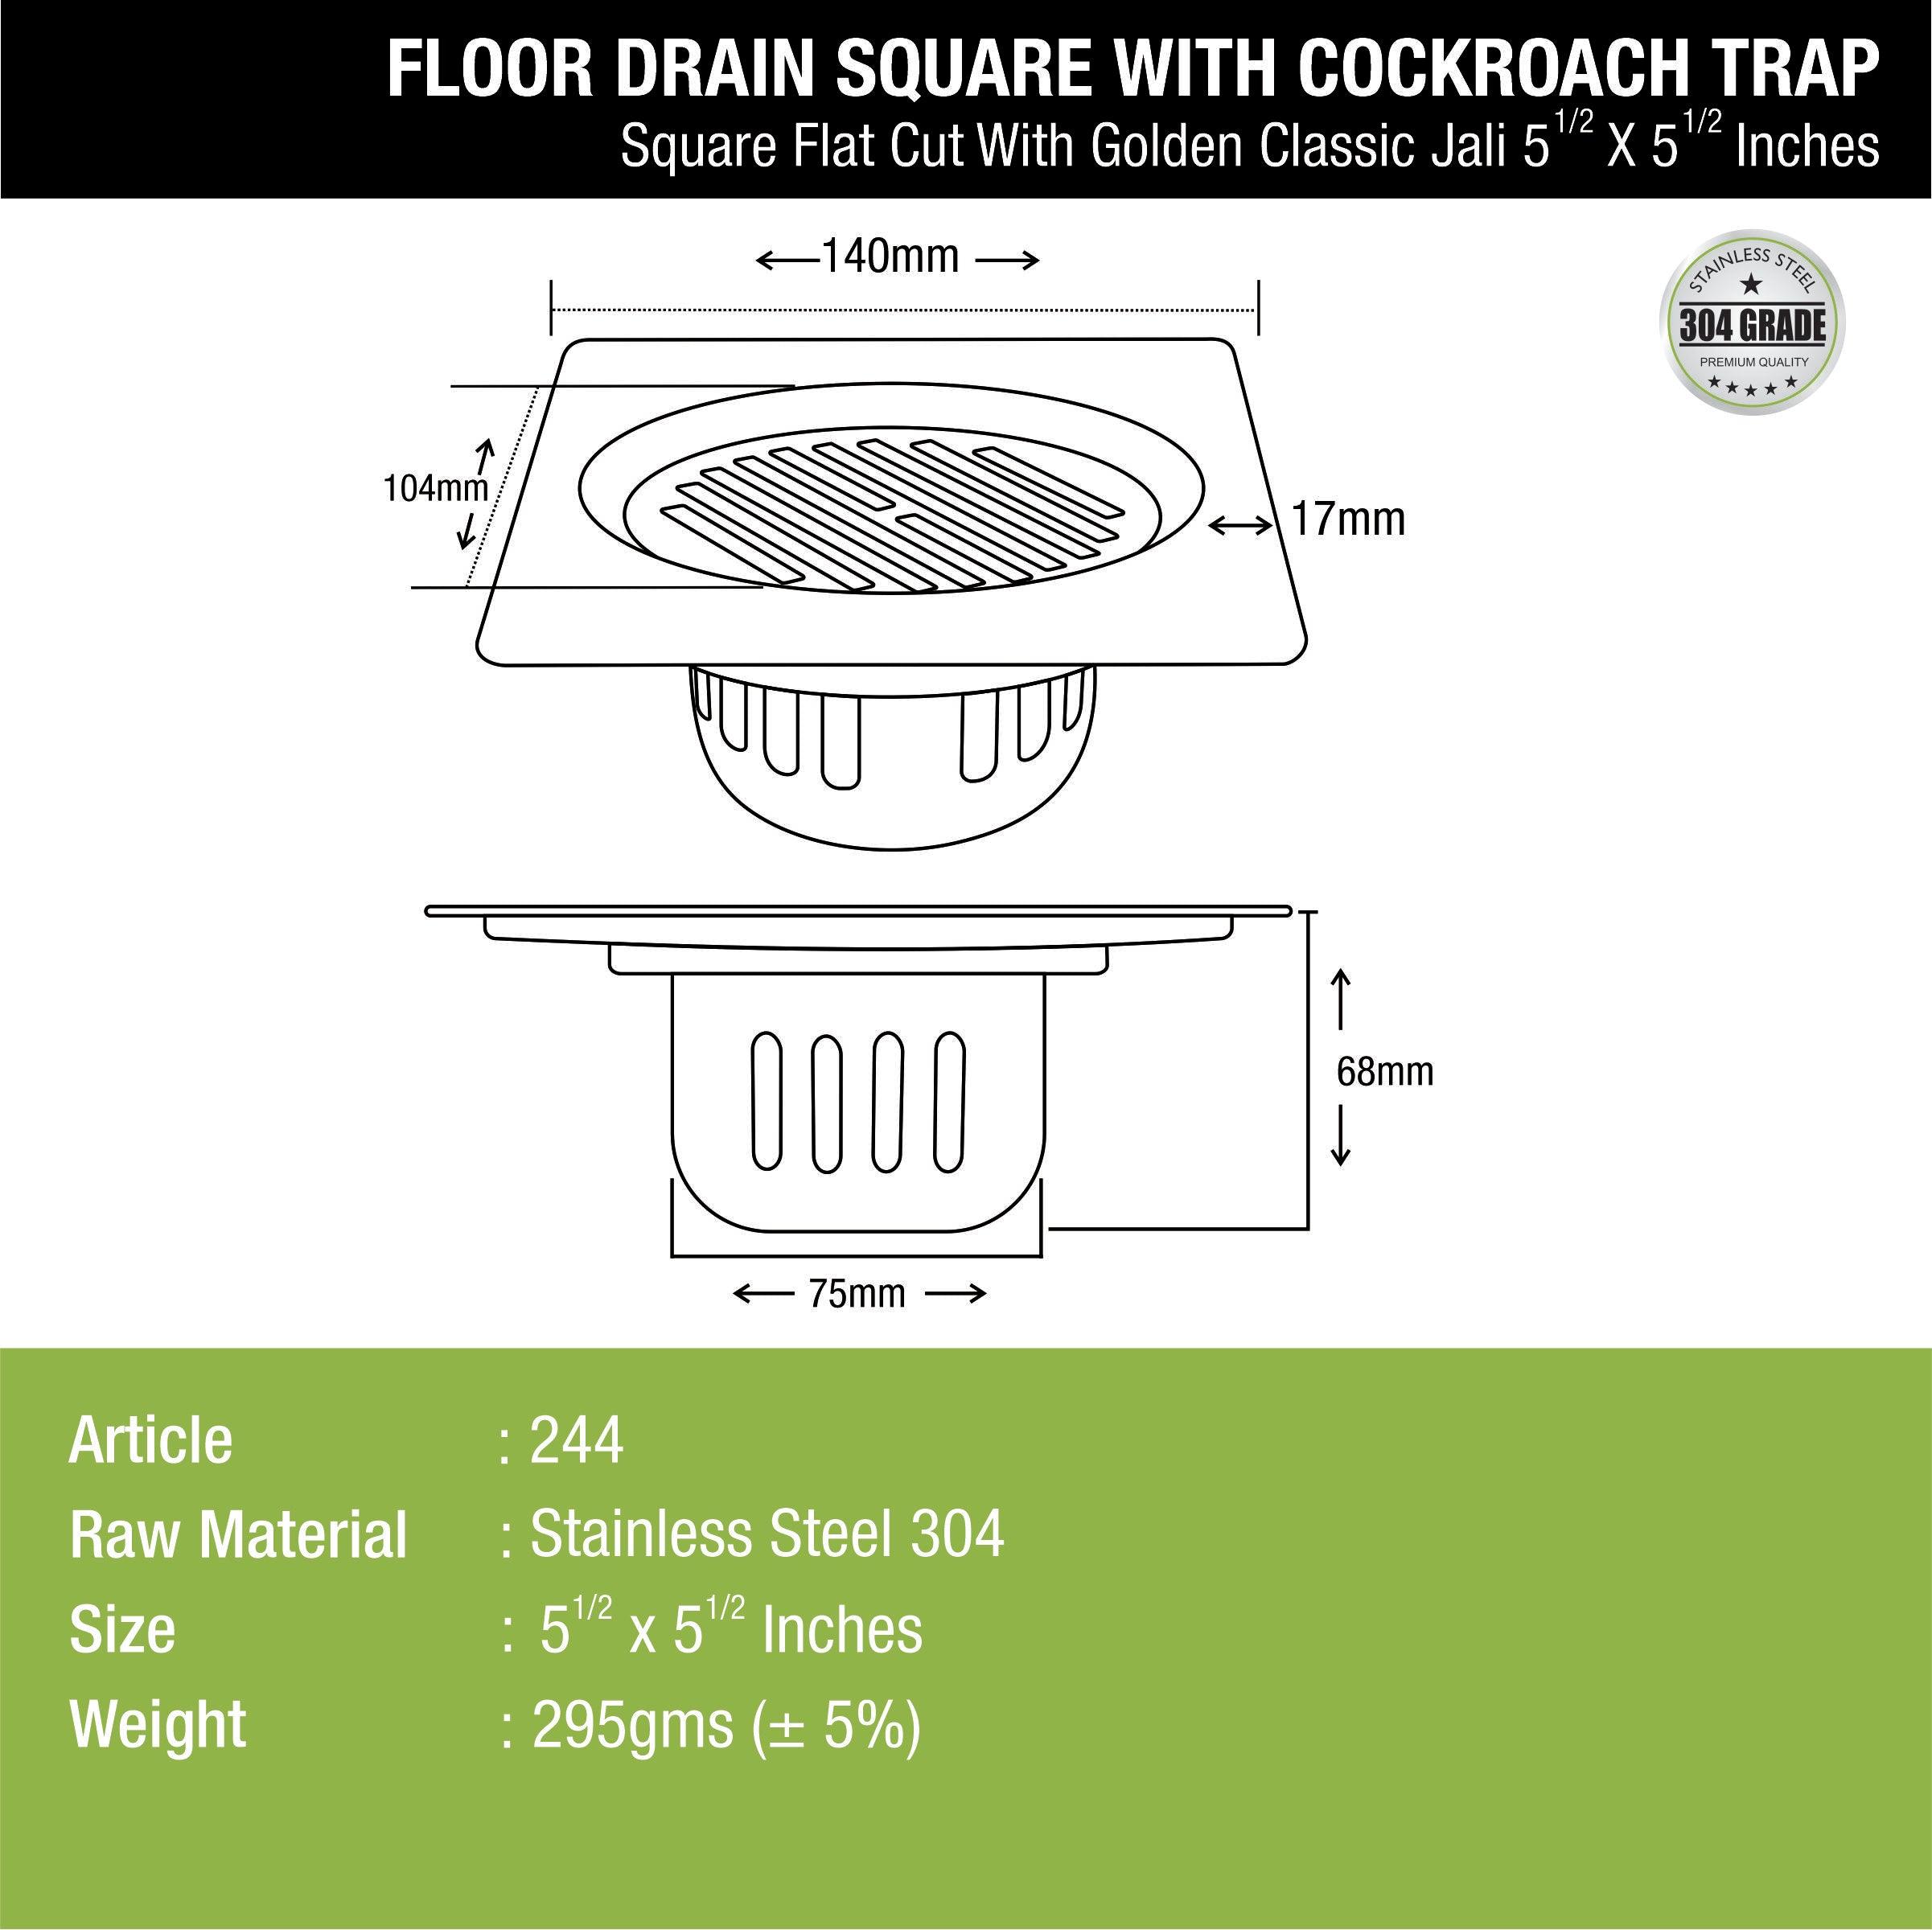 Golden Classic Jali Square Flat Cut Floor Drain (5.5 x 5.5 Inches) with Cockroach Trap - LIPKA - Lipka Home